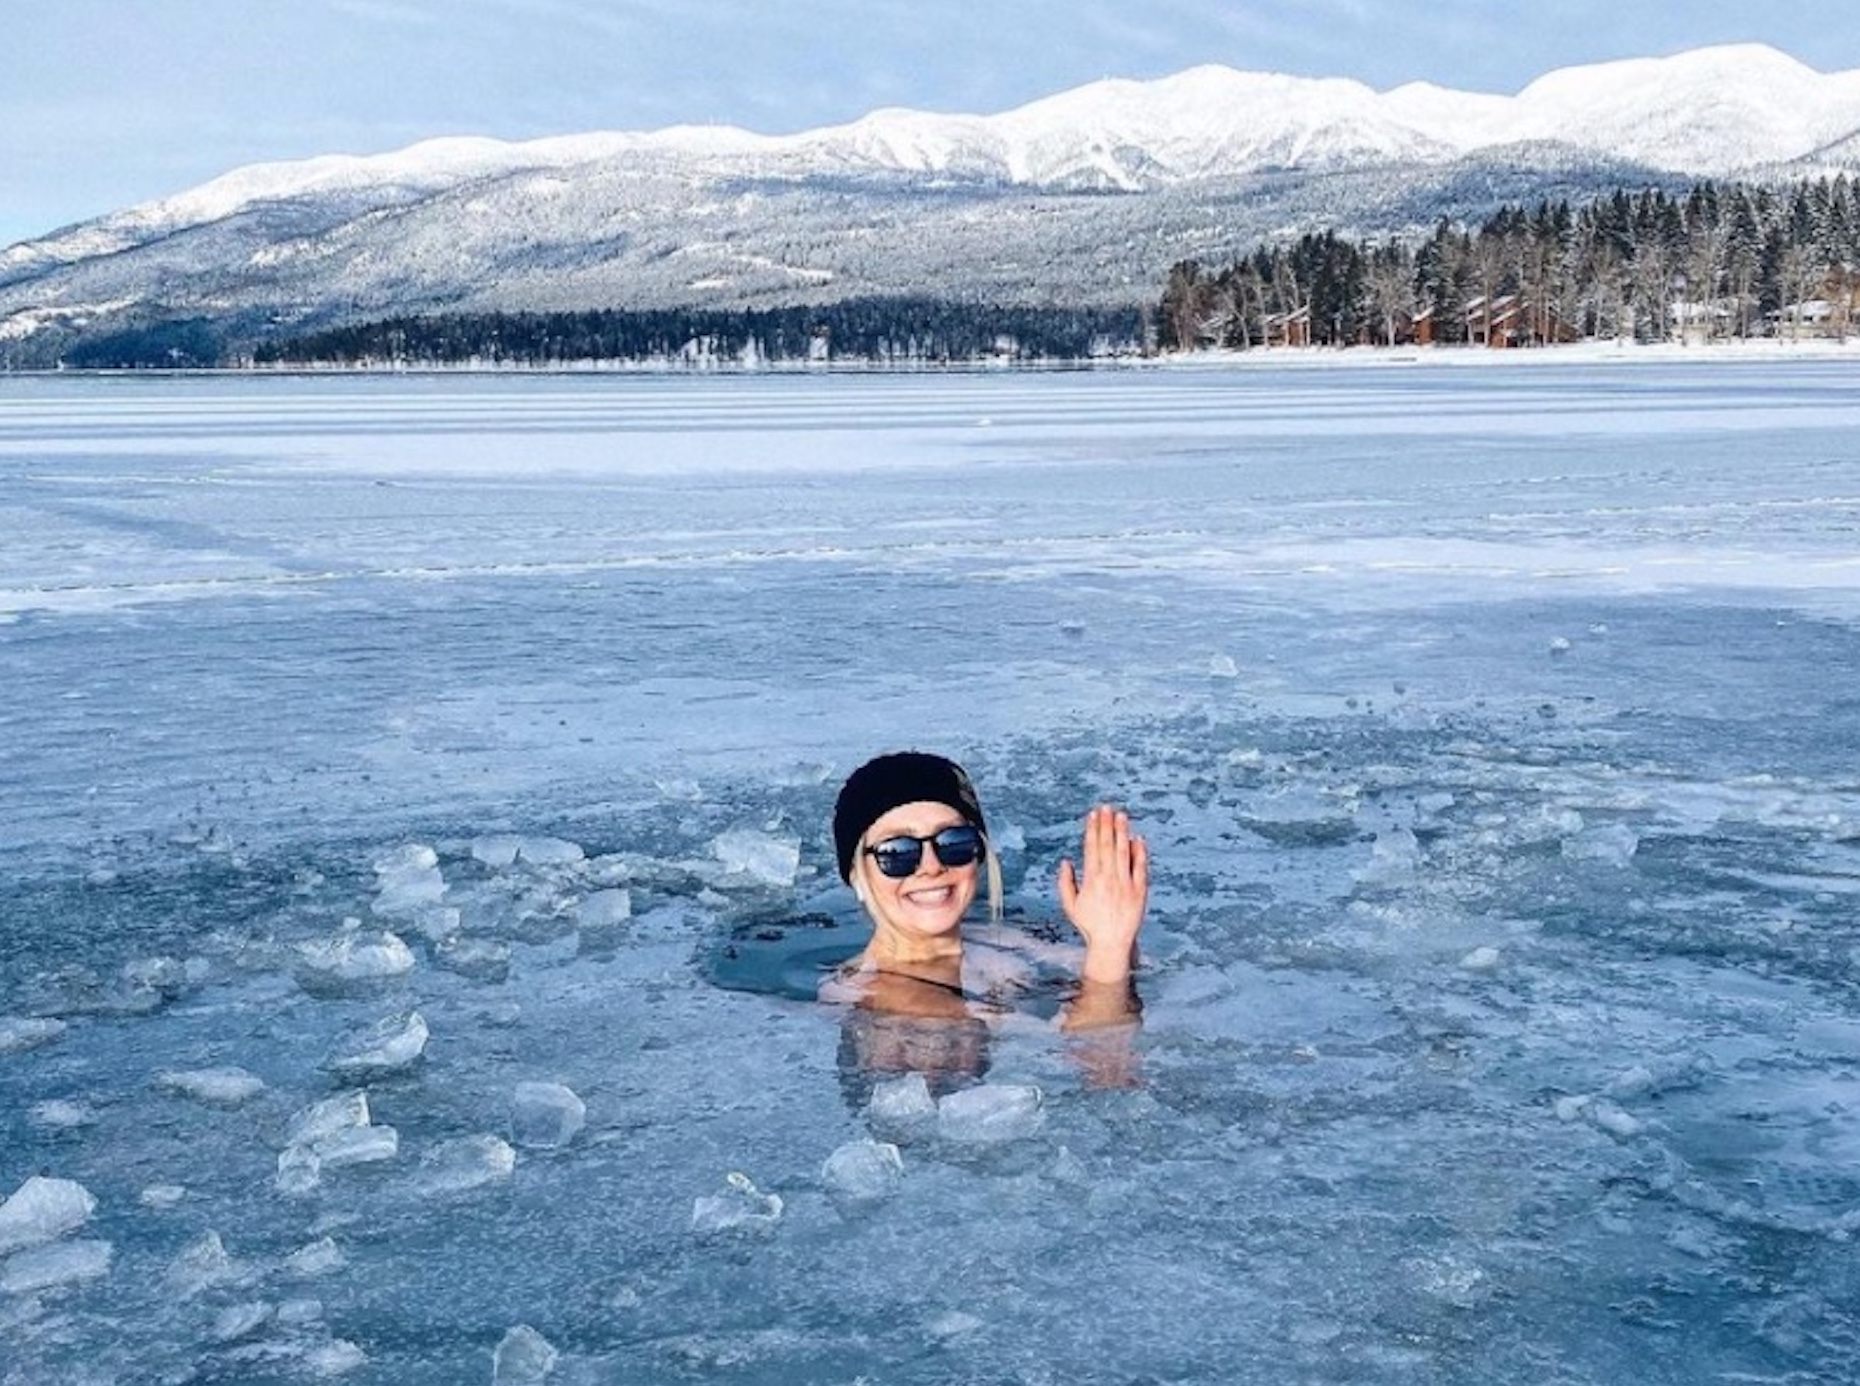 Olympic Skier Utilizes "Wim Hof Method" For Cold Exposure Recovery